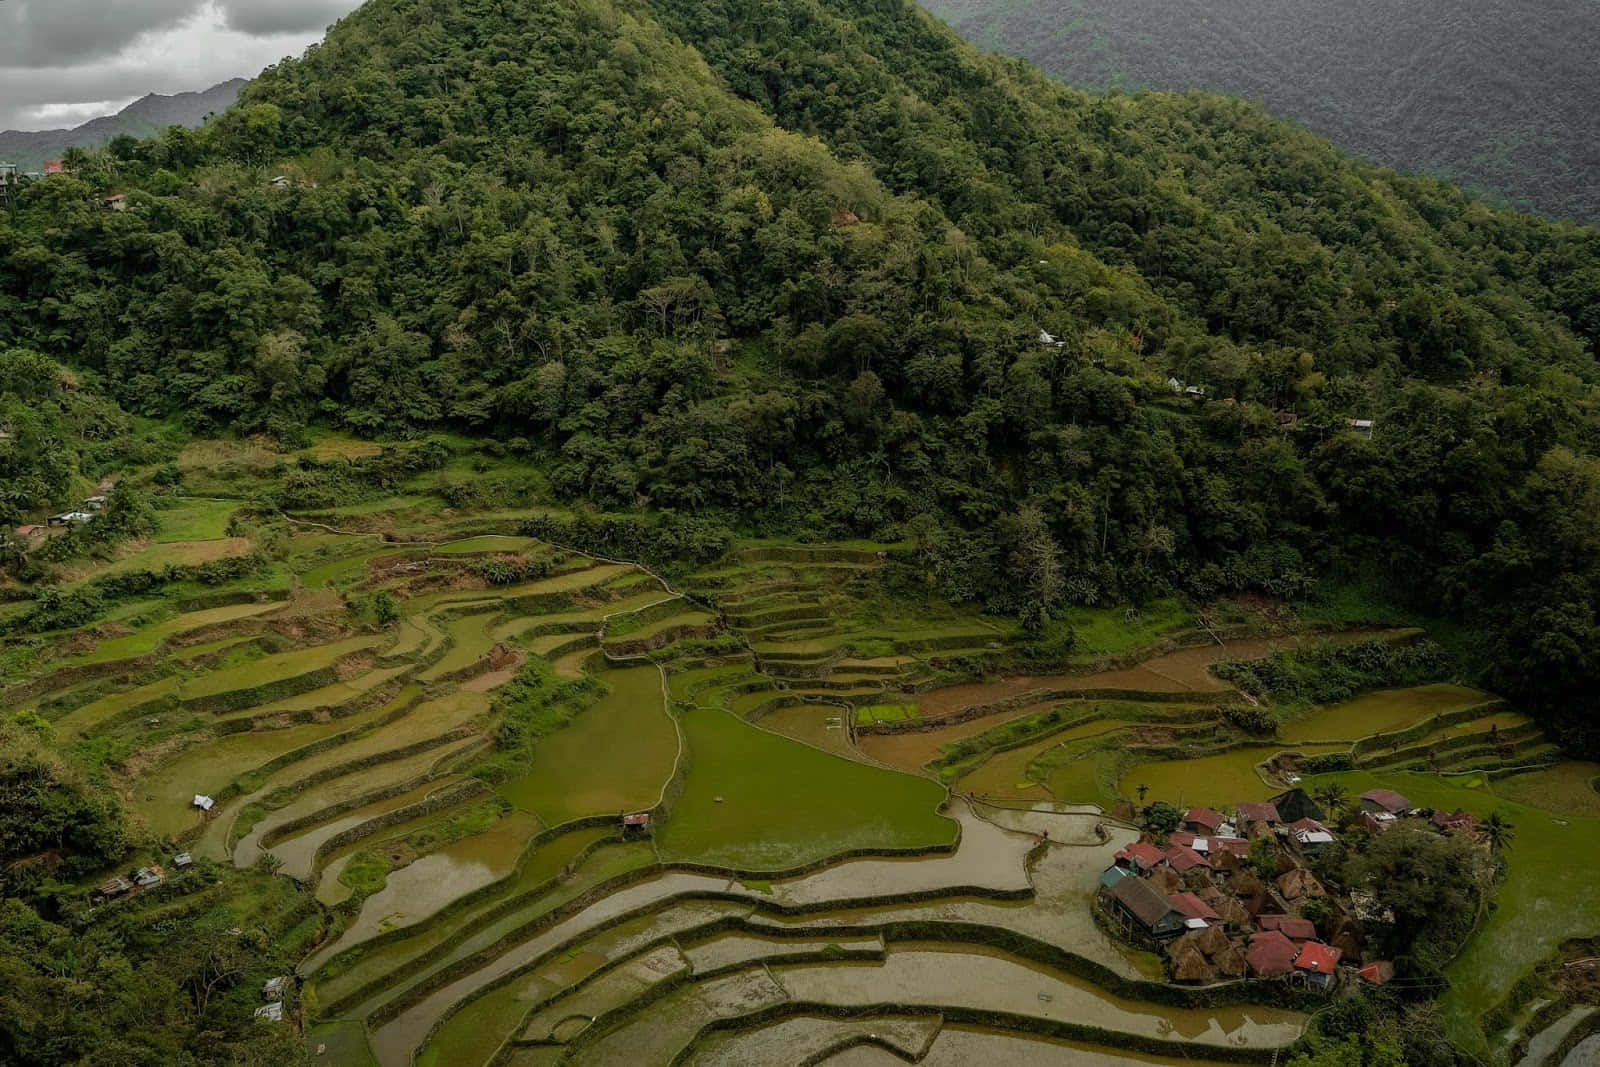 Banaue Rice Terraces In The Philippines During Gloomy Day Wallpaper